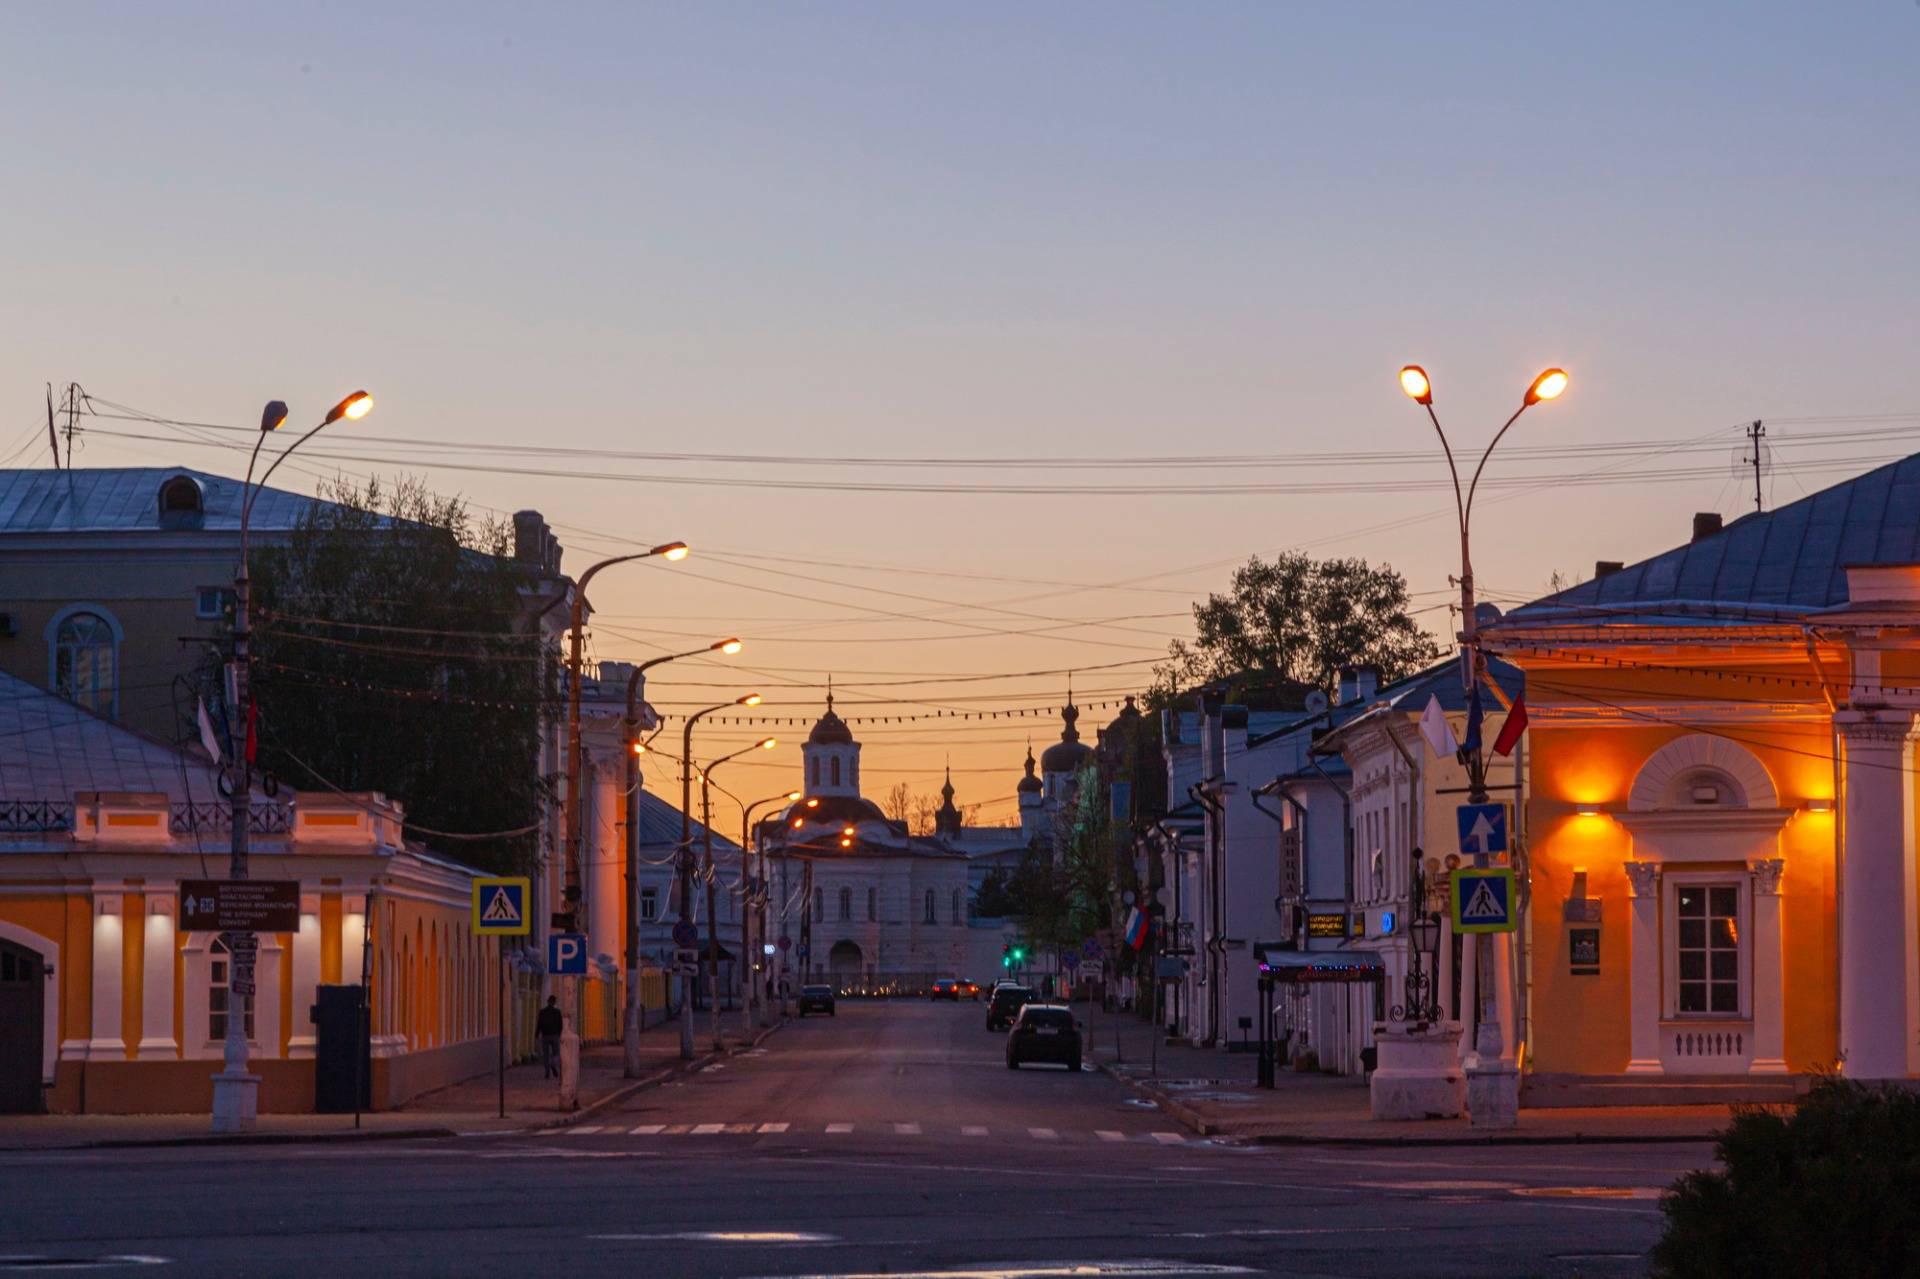 About my lovely Kostroma city